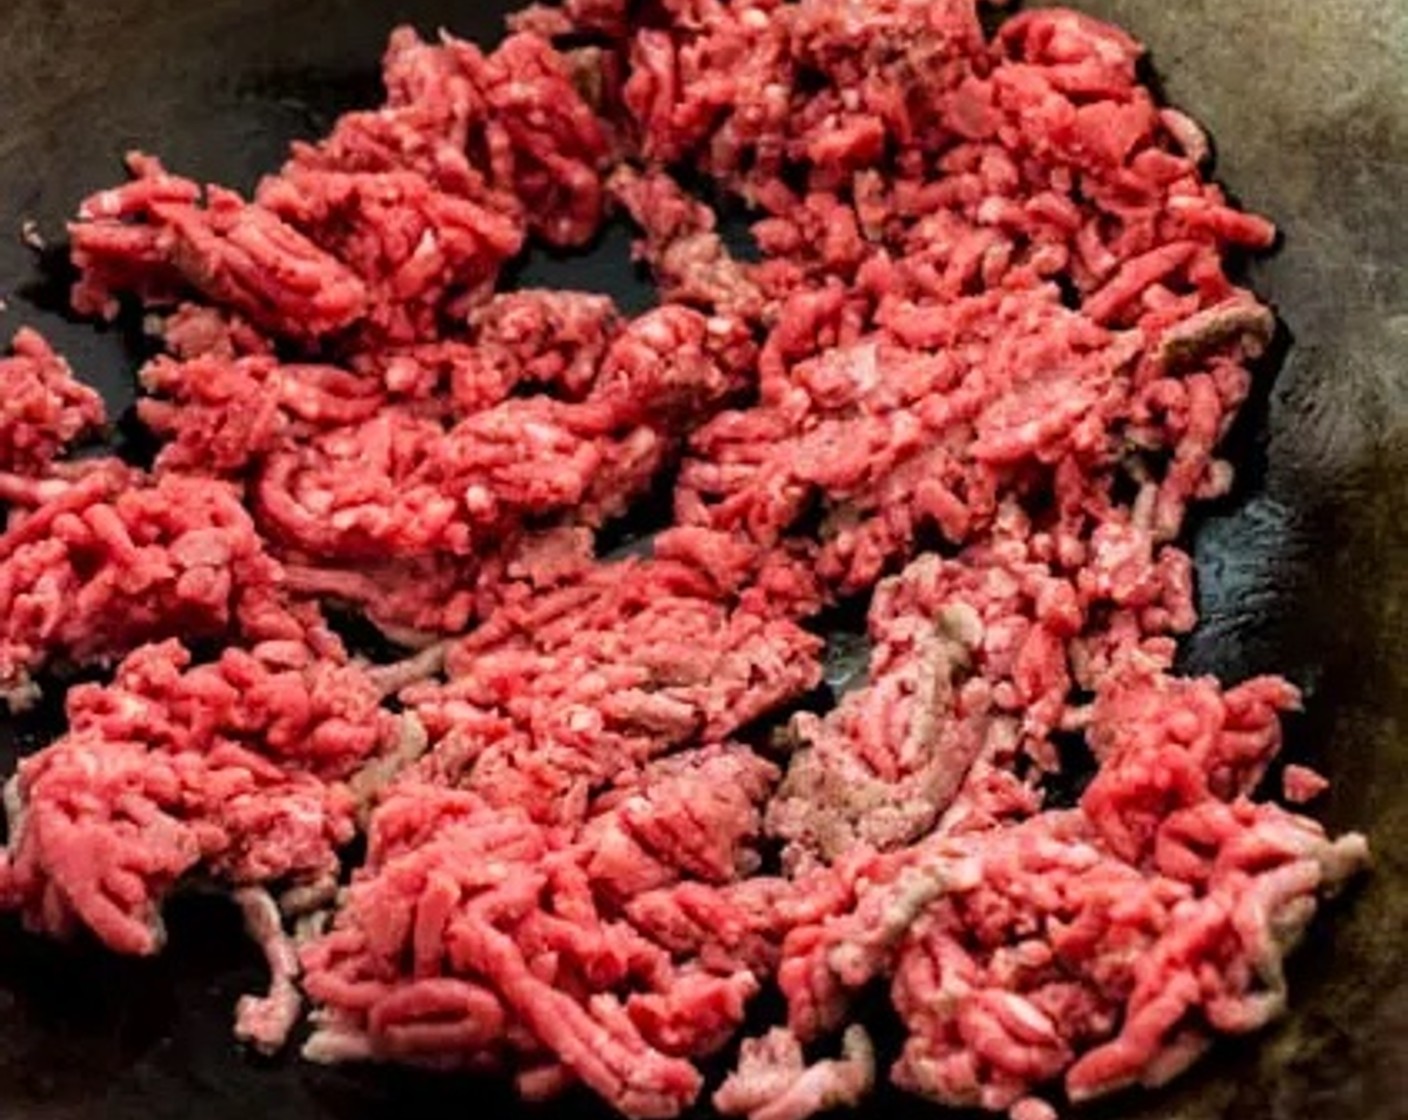 step 2 Add Ground Beef (1 lb) to the wok. Spread the ground beef out as much as possible into a thin layer so it cooks quickly and evenly. Stir-fry the ground beef until fully cooked.